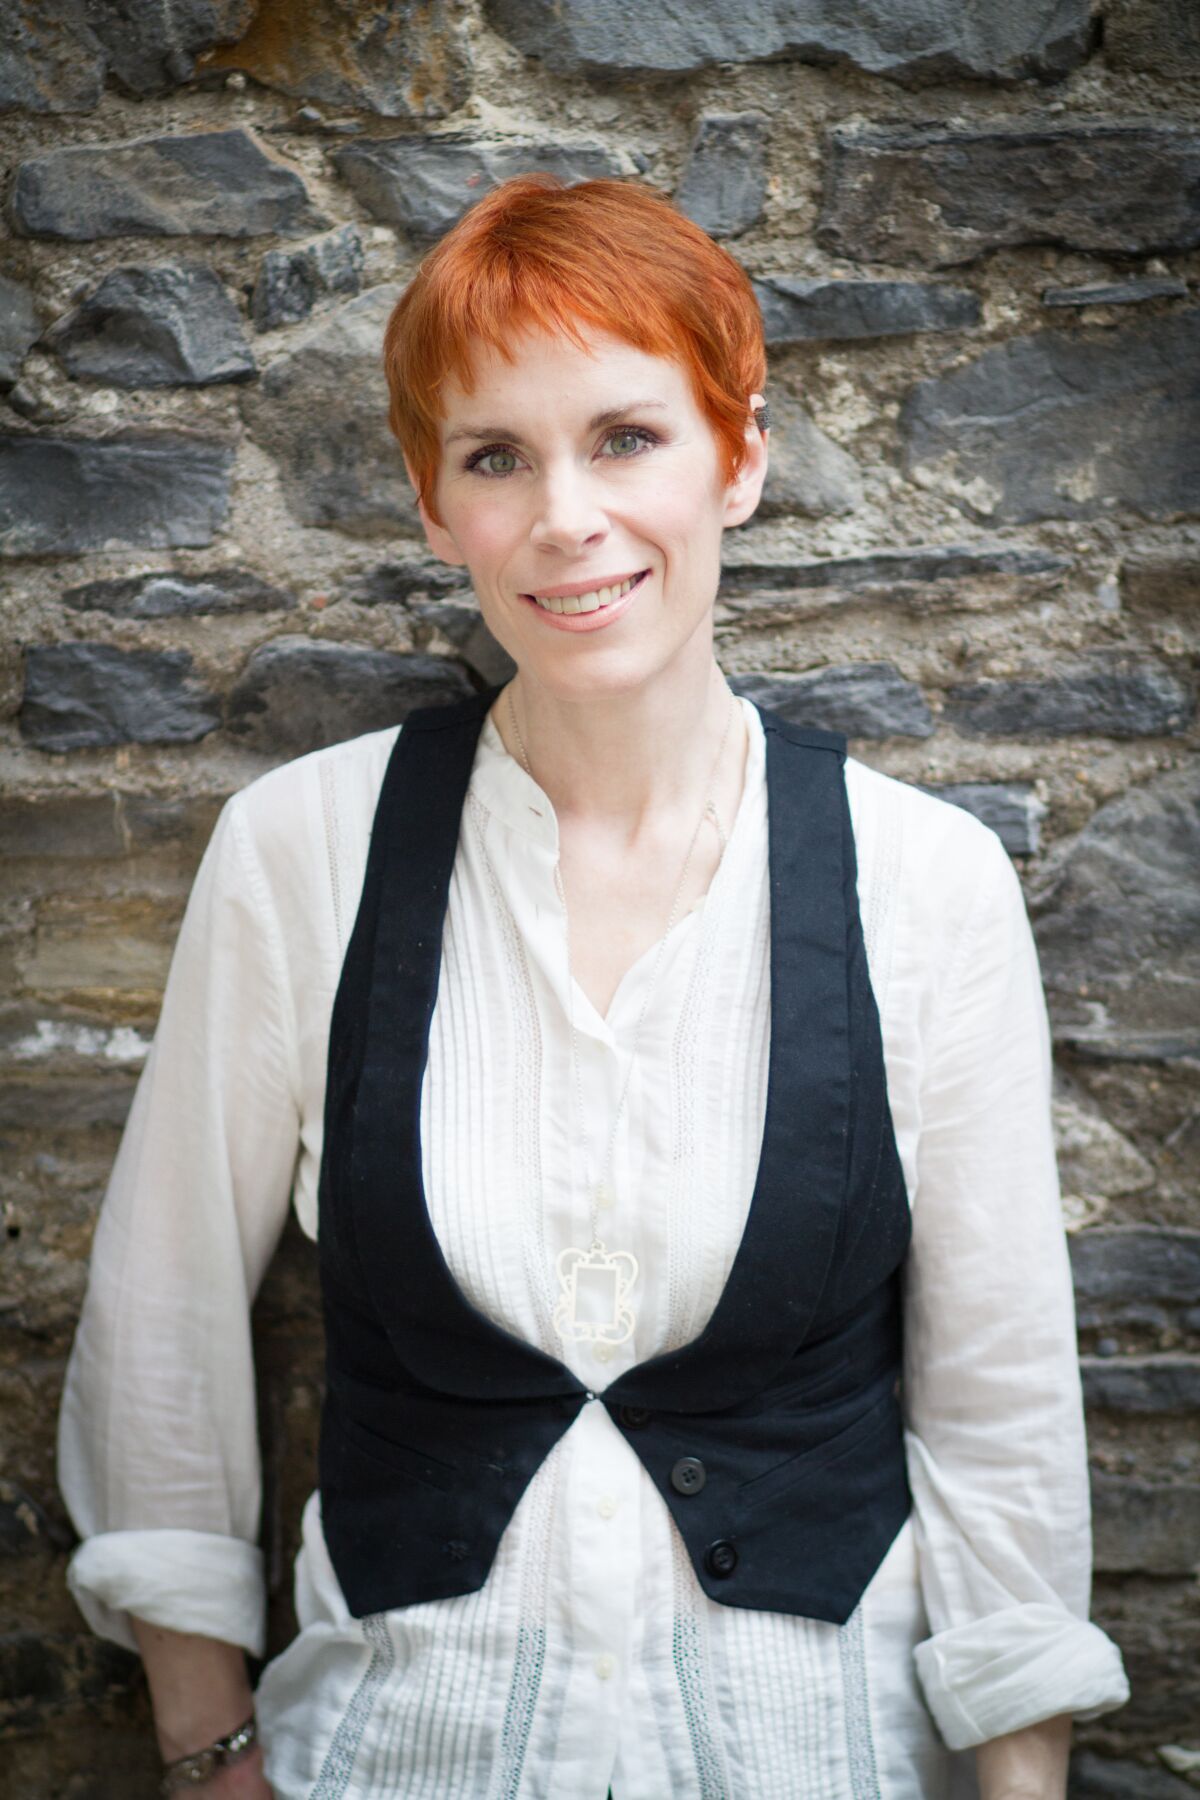 Tana French wrote "The Searcher."